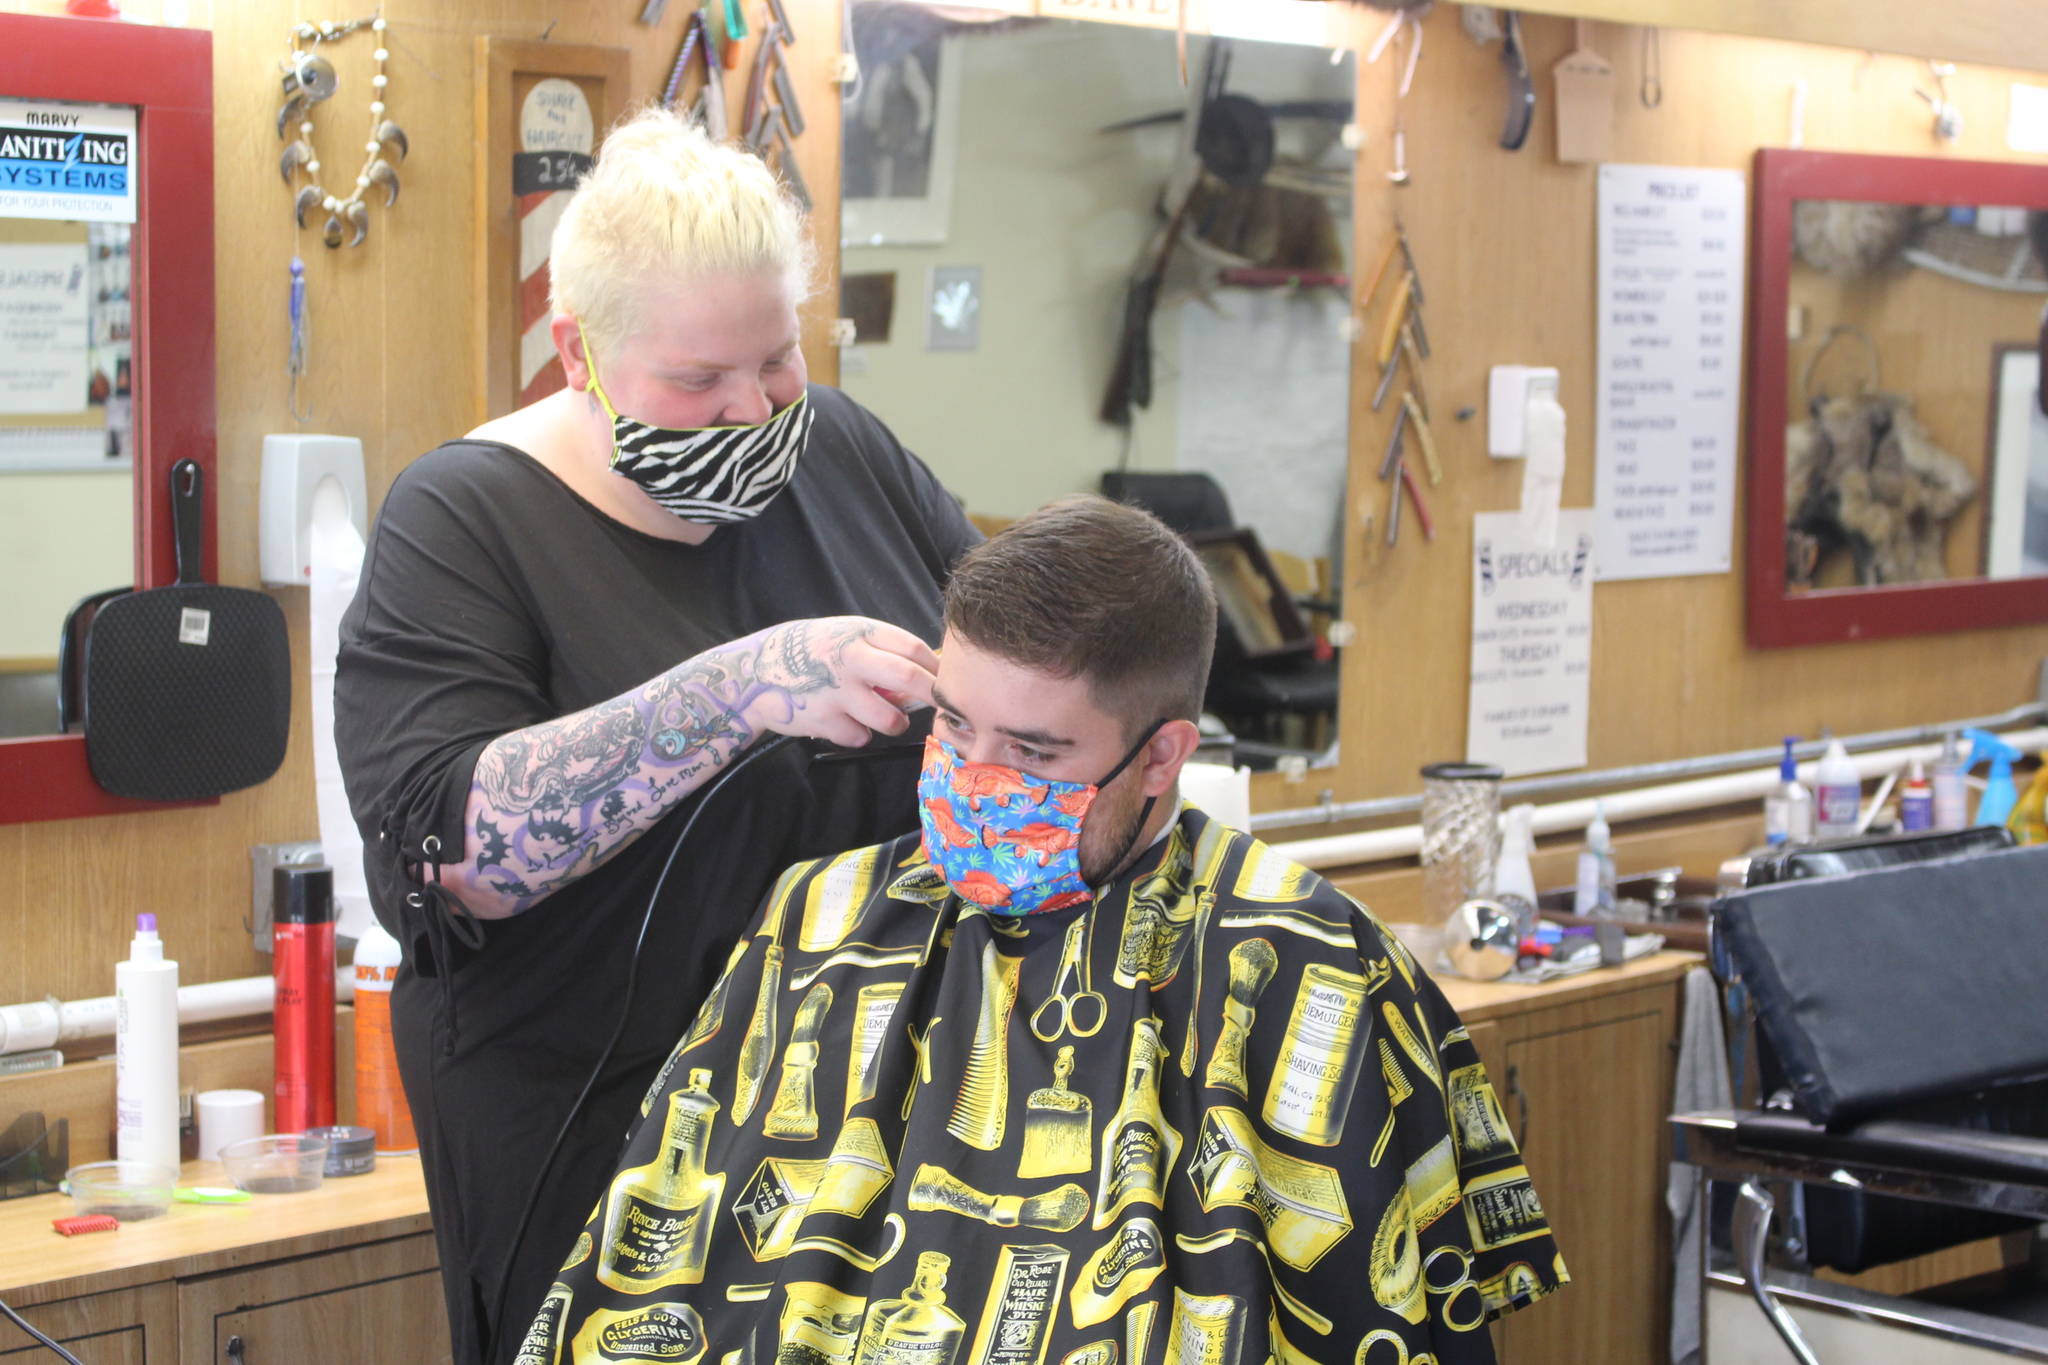 Skylar Giordano cuts Ryan Huerta’s hair at RD’s Barber Shop in Kenai, Alaska on Thursday, July 9, 2020. RD’s is one of the 186 local businesses and nonprofits in Kenai that already received financial assistance through the City of Kenai’s Grant Program. (Photo by Brian Mazurek/Peninsula Clarion)